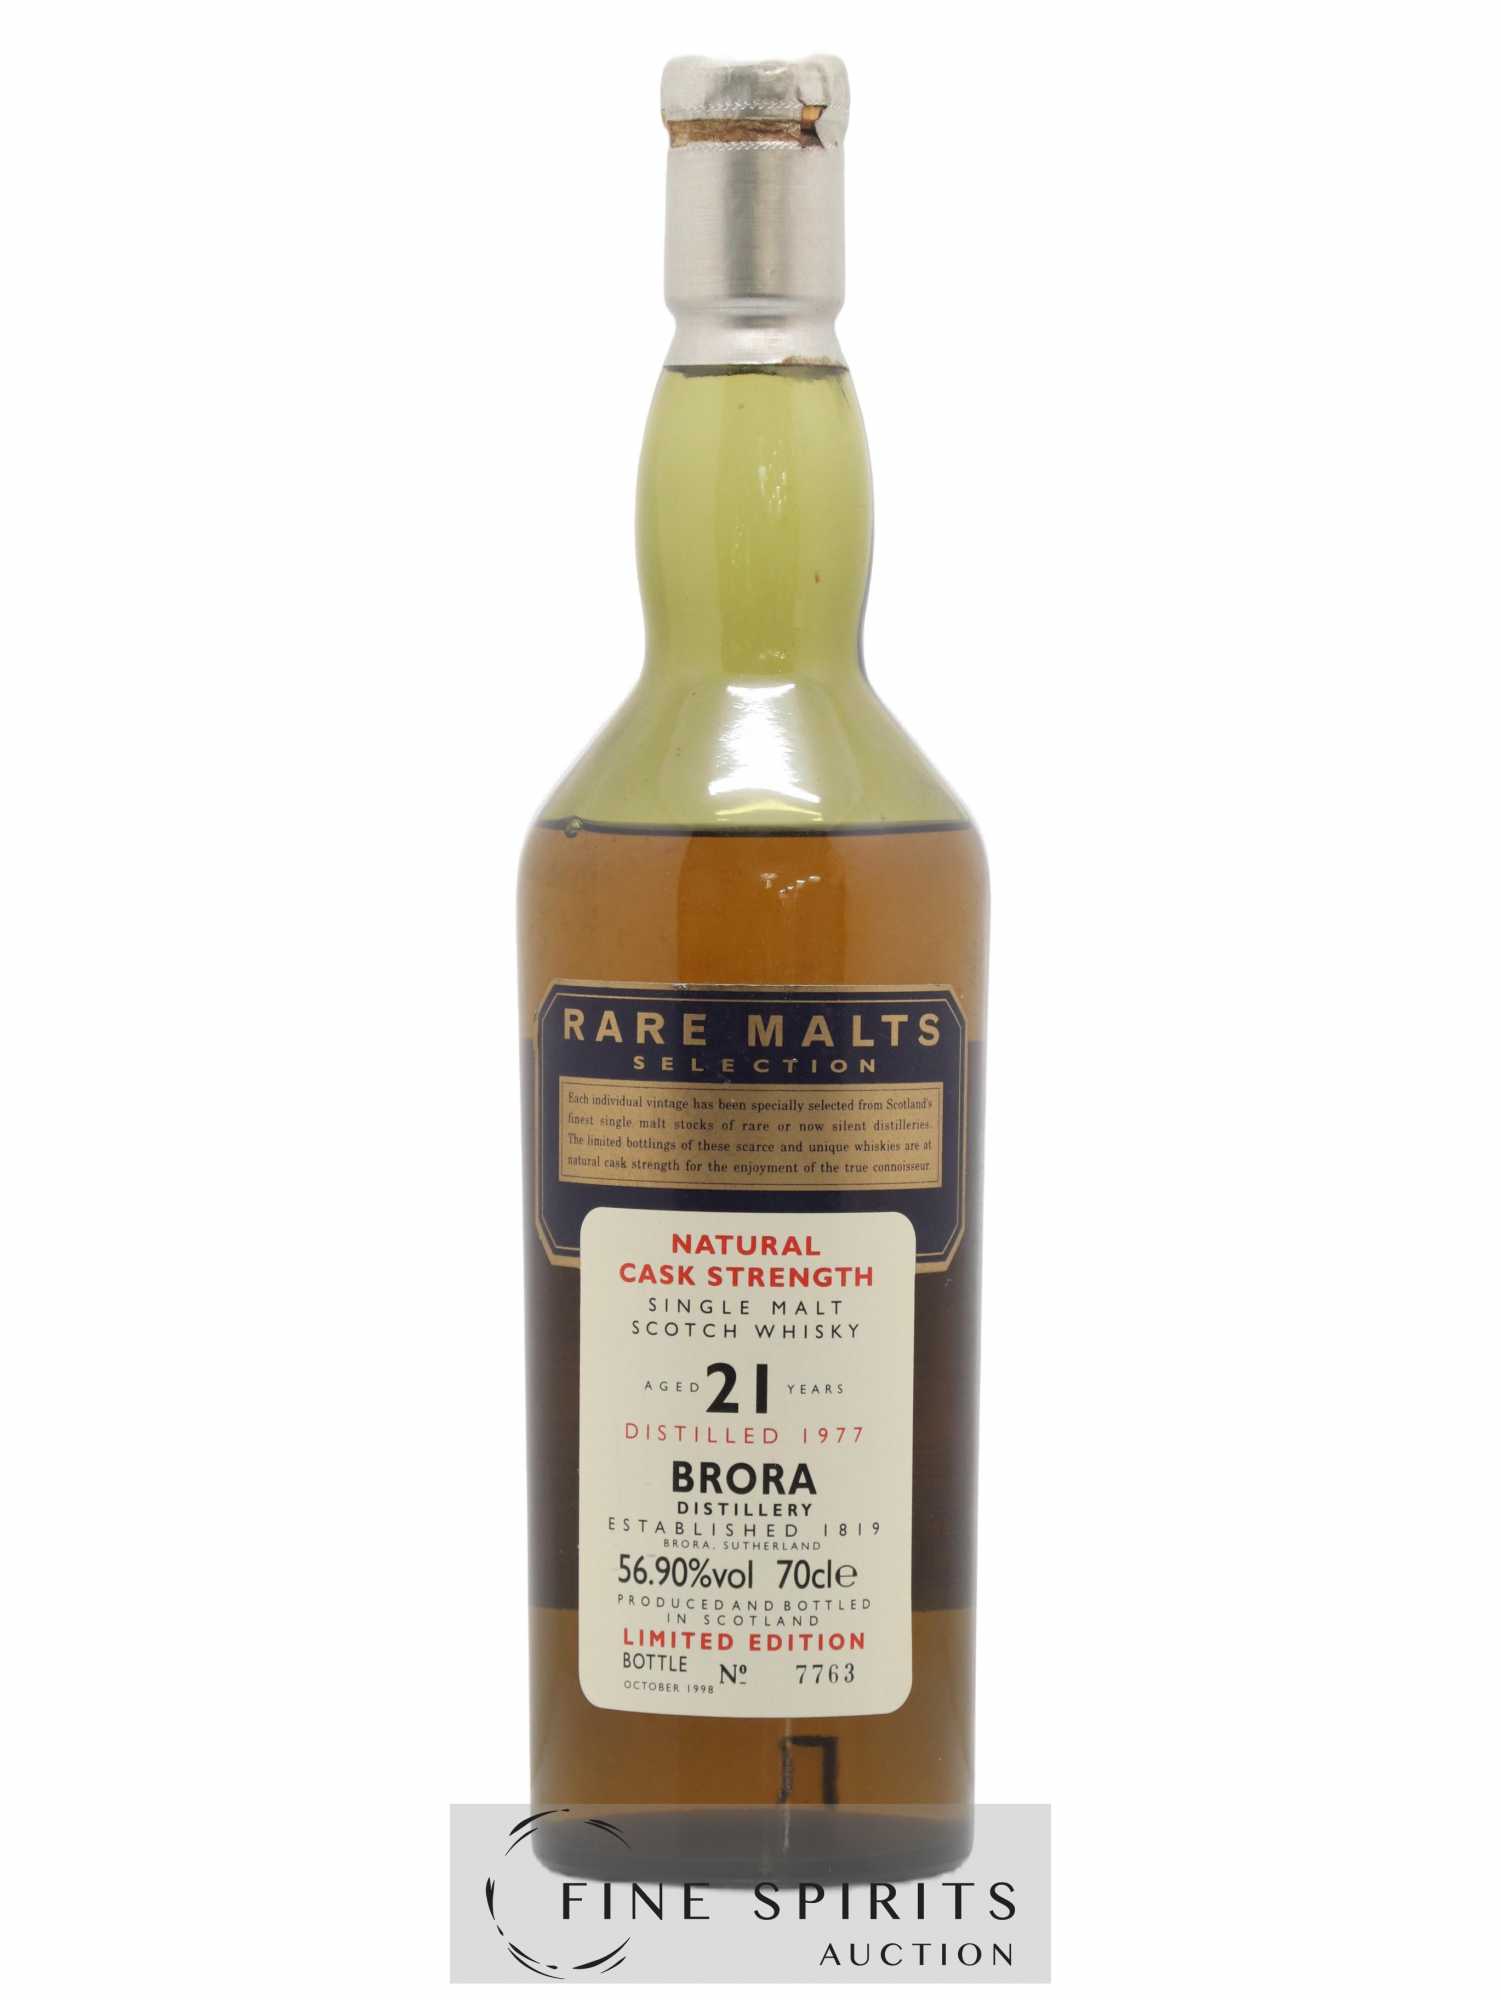 Brora 21 years 1977 Of. Rare Malts Selection Natural Cask Strengh - bottled 1998 Limited Edition 